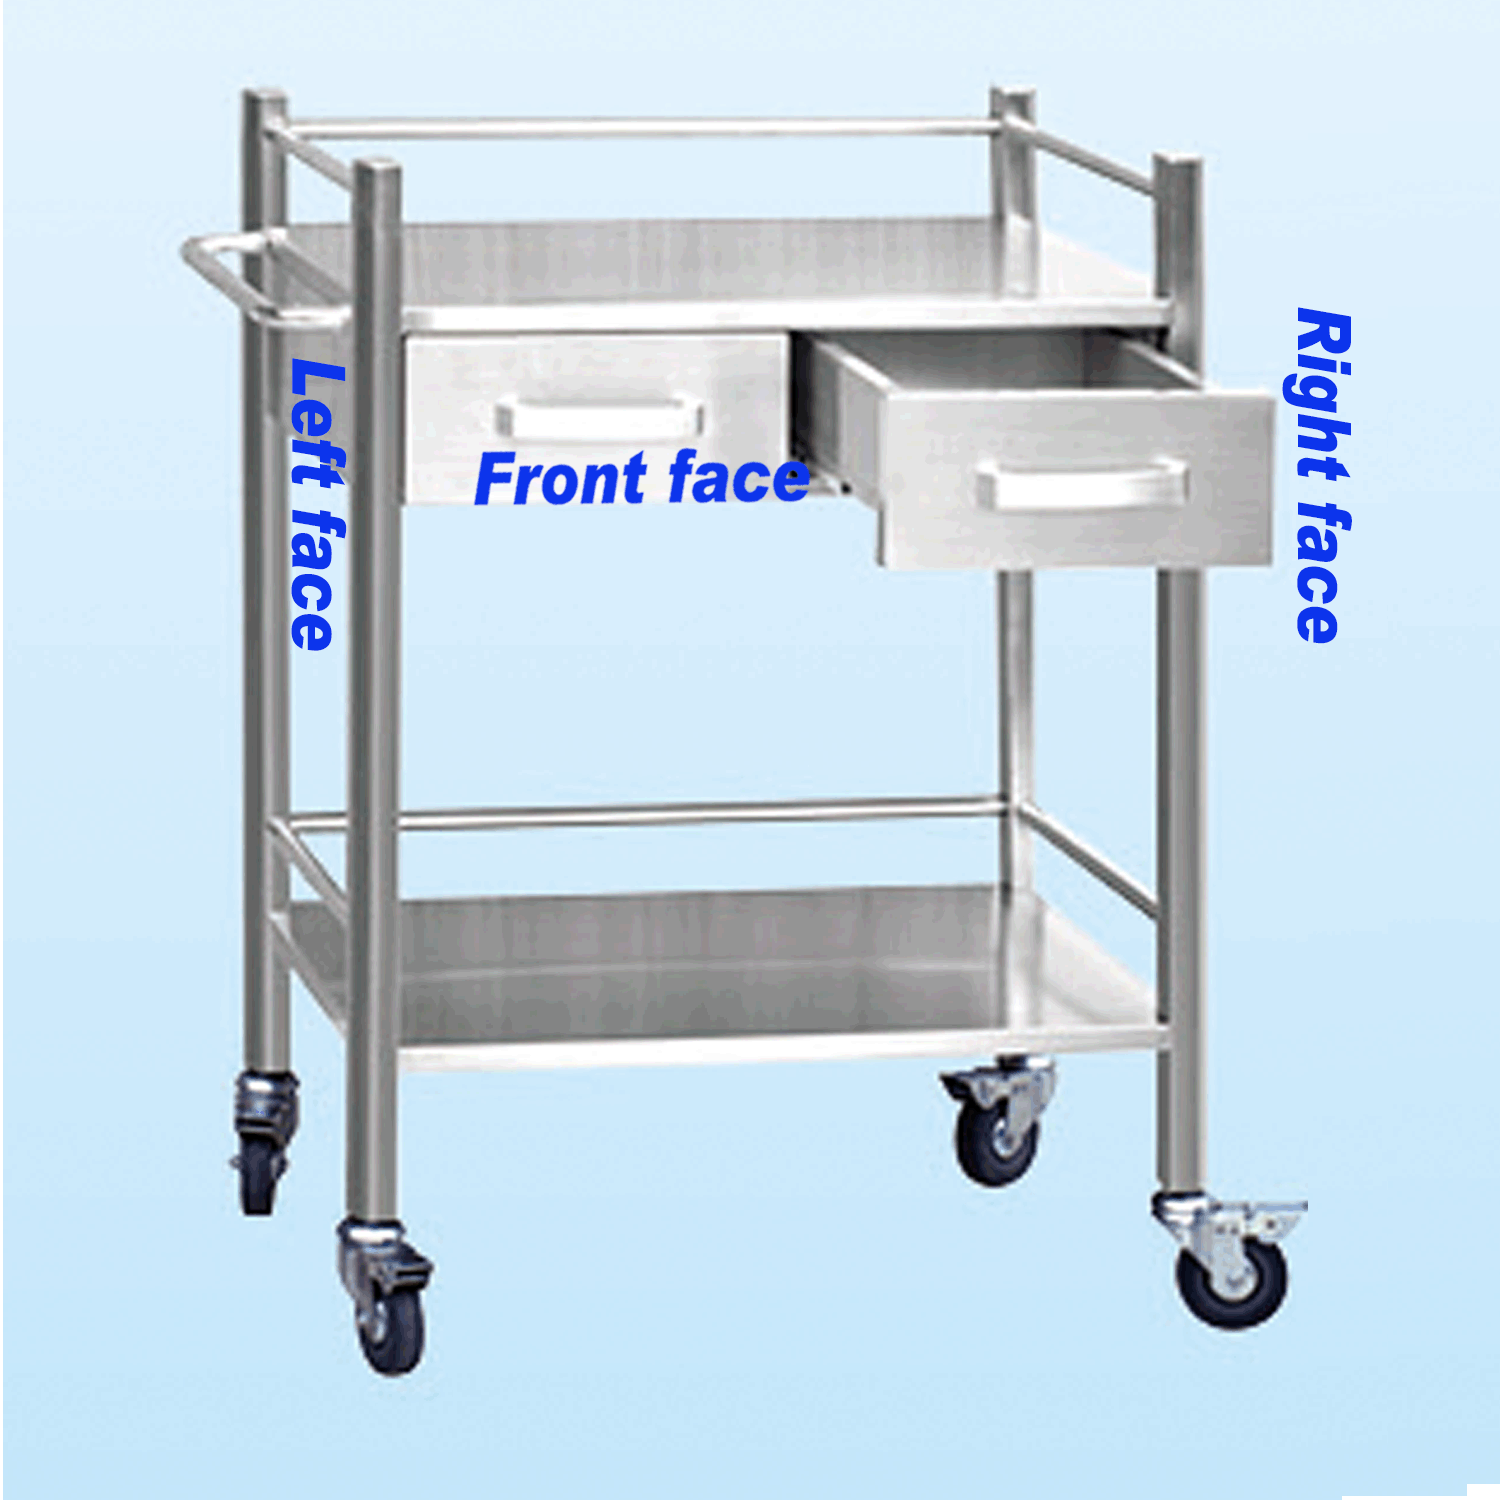 Drawer ZAQI Extra Large Medical Cart Load 150kg Silent Casters Size : 75×53×98cm 330 Lbs Handle 3 Shelf White Plastic Commercial Dental Pets Clinic Trolley with Storage Basket 